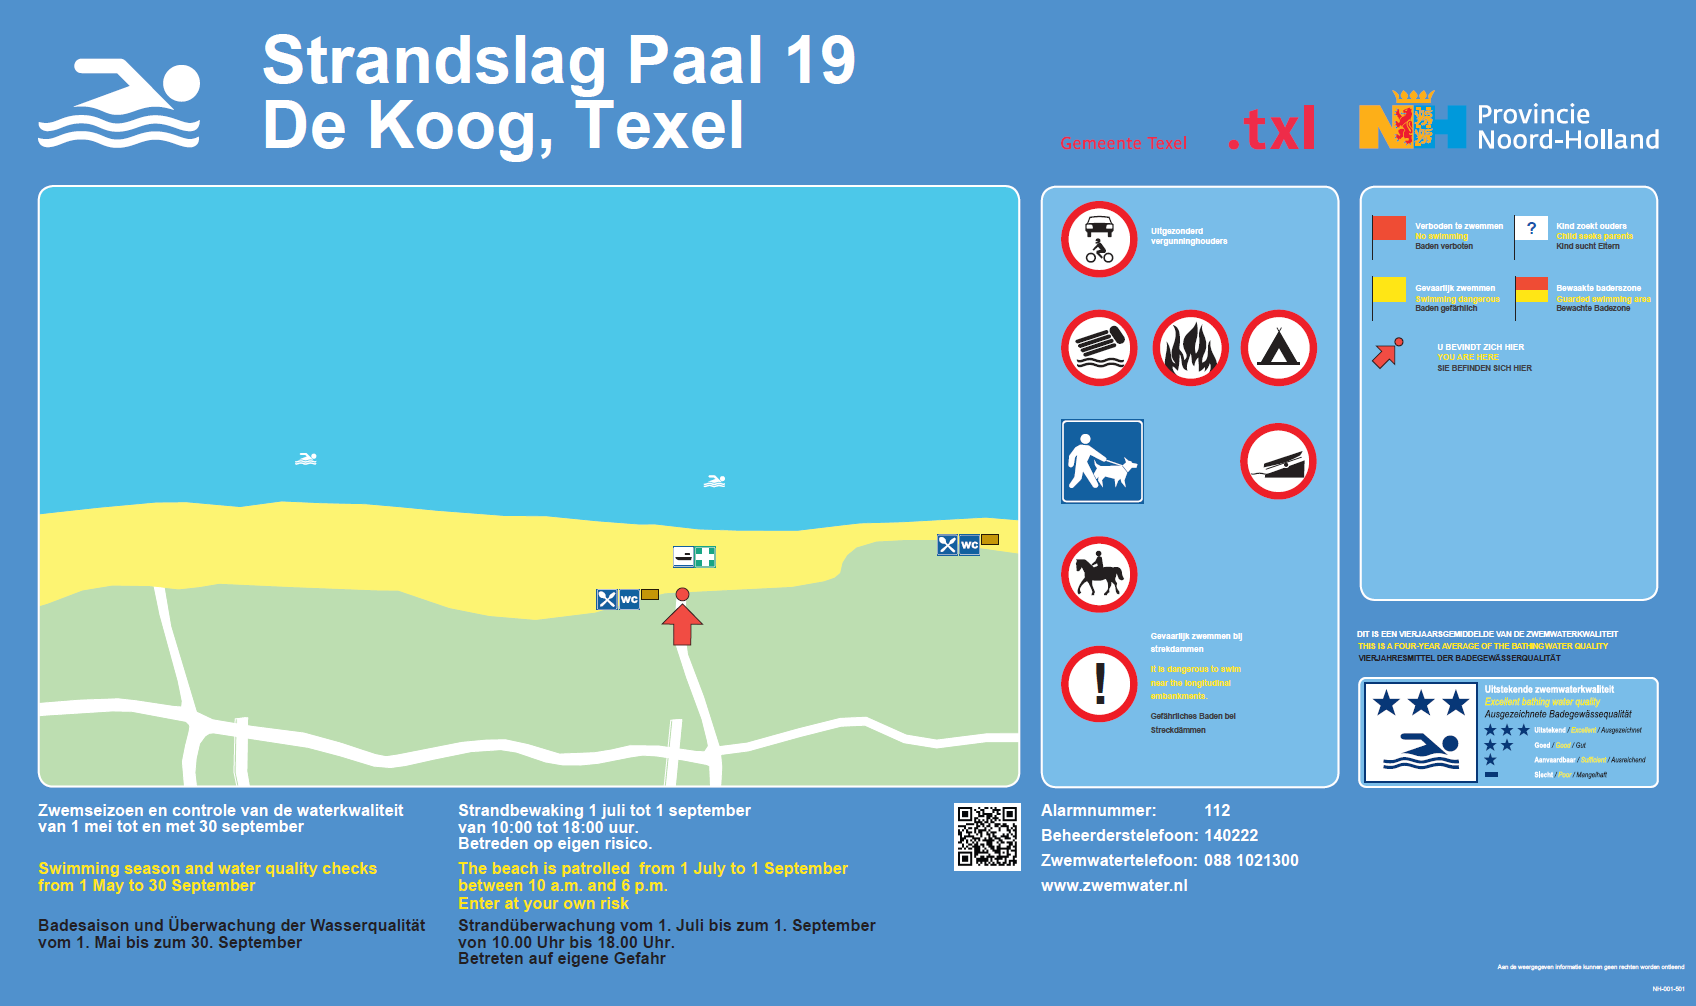 The information board at the swimming location De Koog Strandslag Paal 19